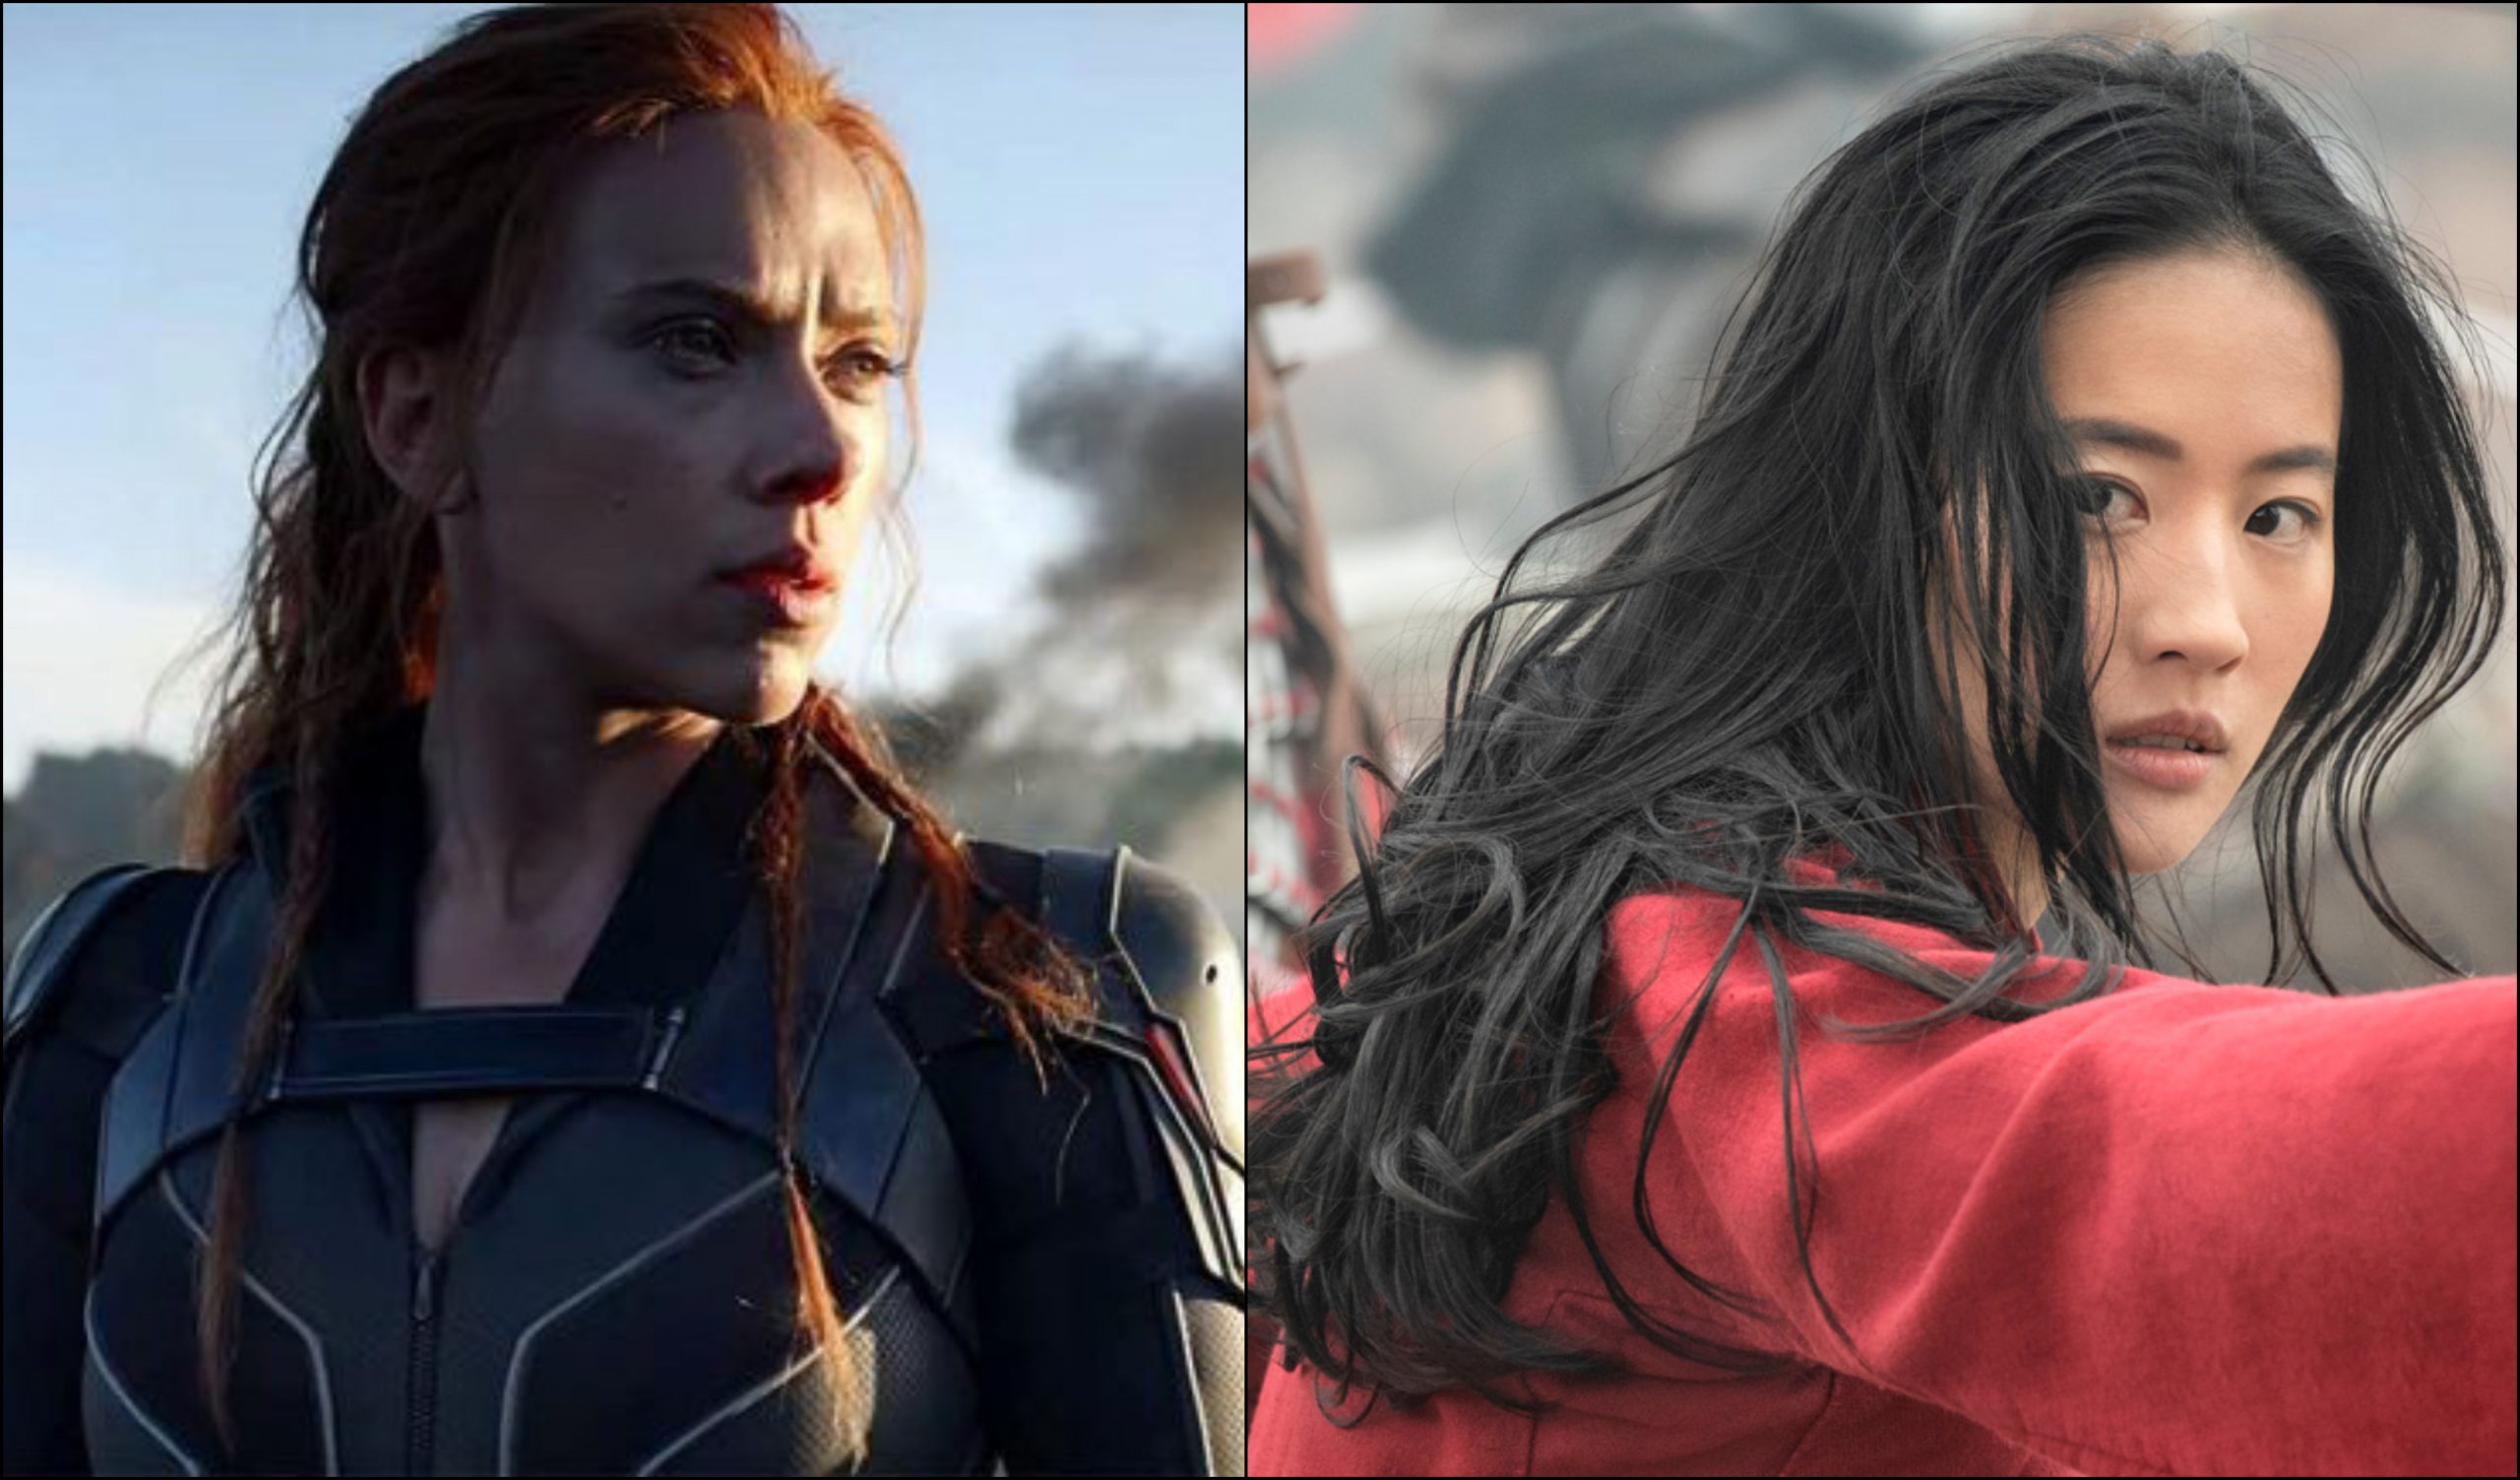 Fans Want Disney to Release ‘Mulan’ and Marvel Studios ‘Black Widow’ on Digital or on Disney+